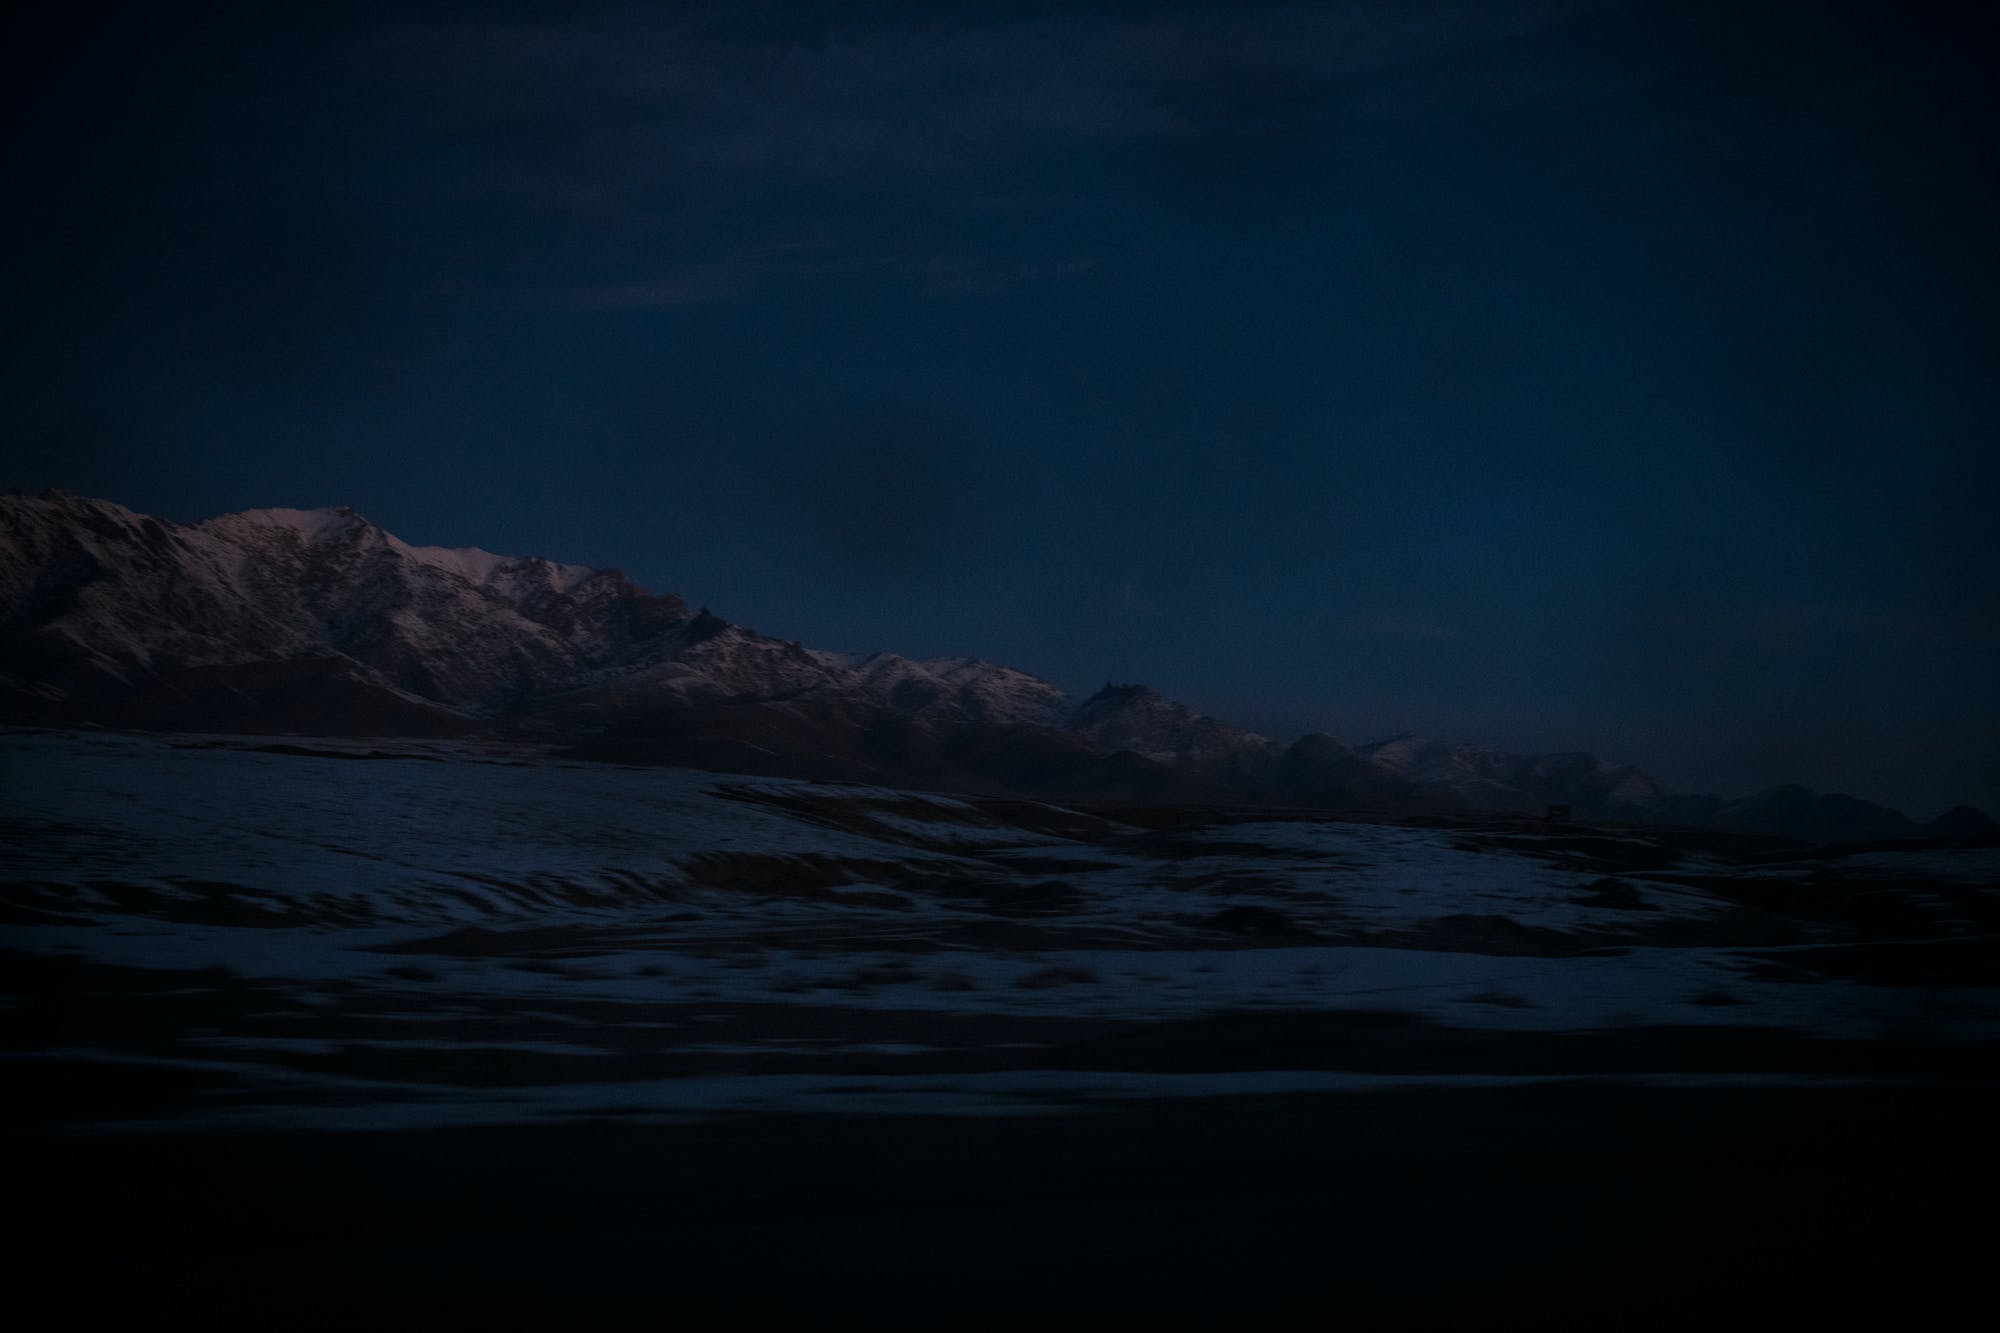 Mountains covered in this winter’s first snow in Wardak province, as seen from the Kabul-Kandahar Highway where it passes through Sayedabad district, at dawn.